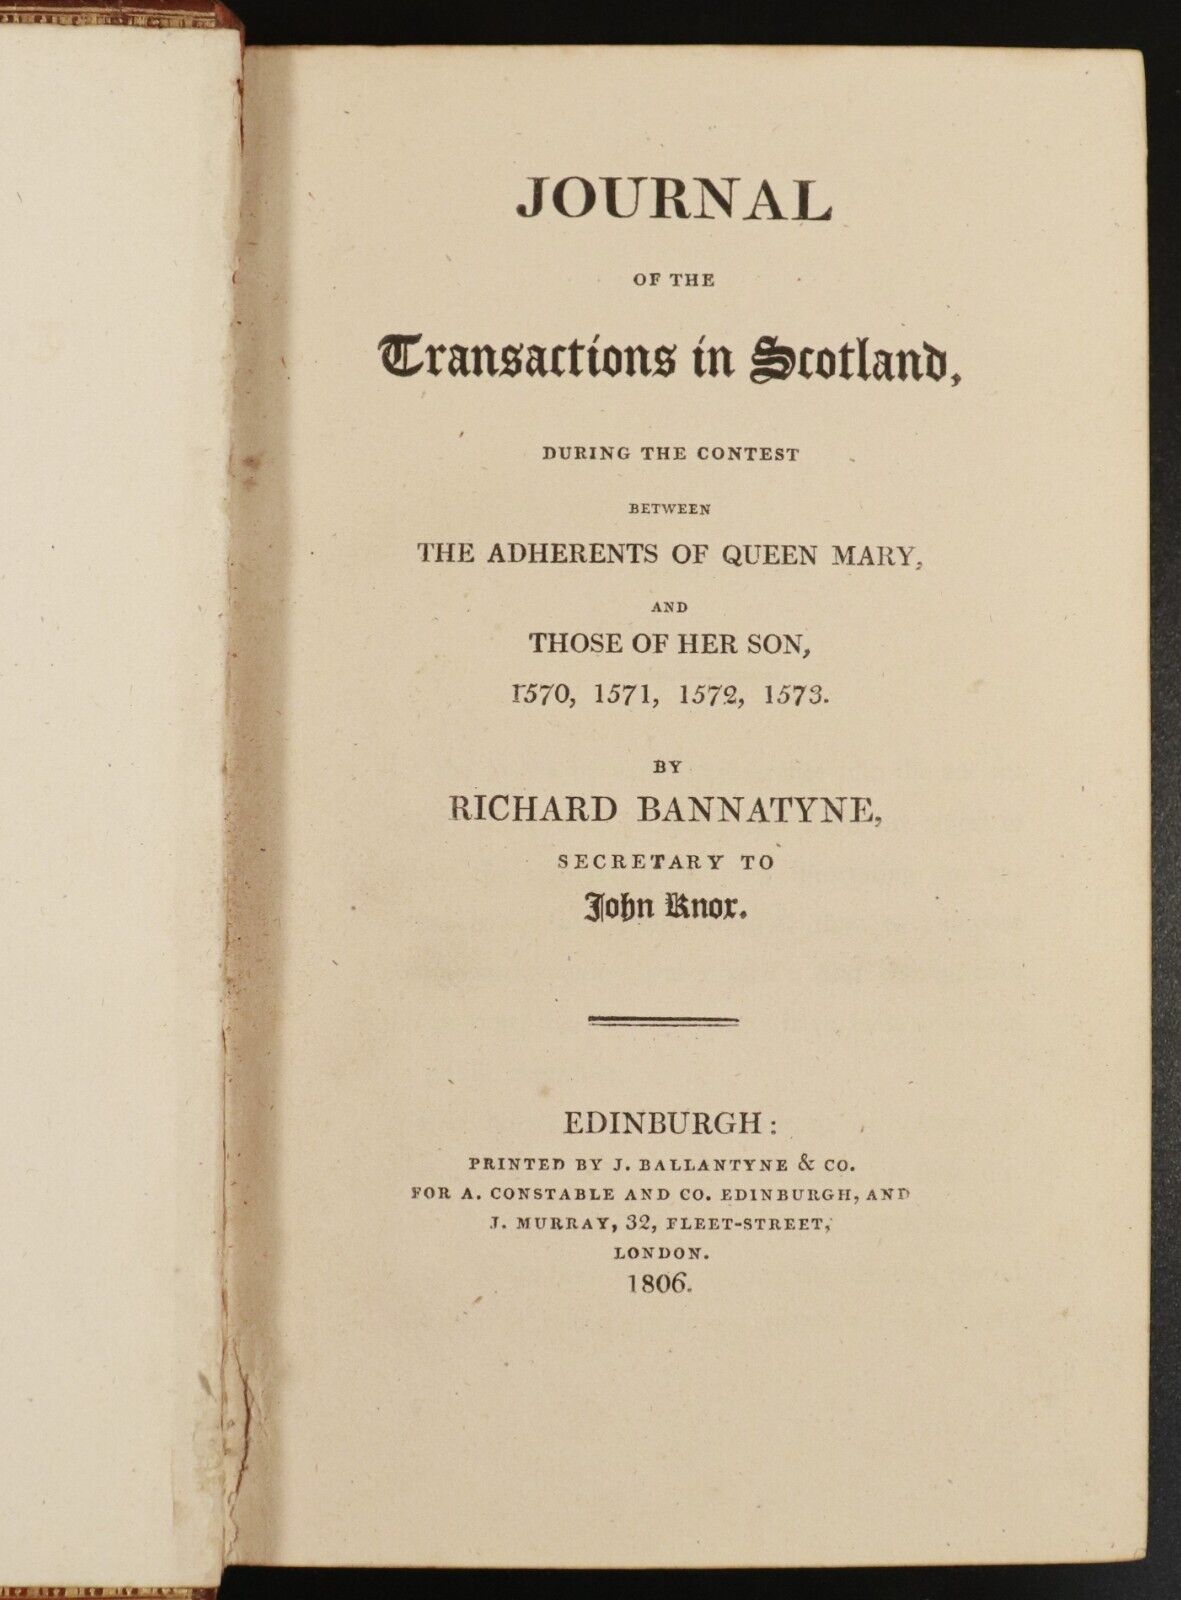 1806 Journal Of The Transactions In Scotland by R. Bannatyne - Antiquarian Book